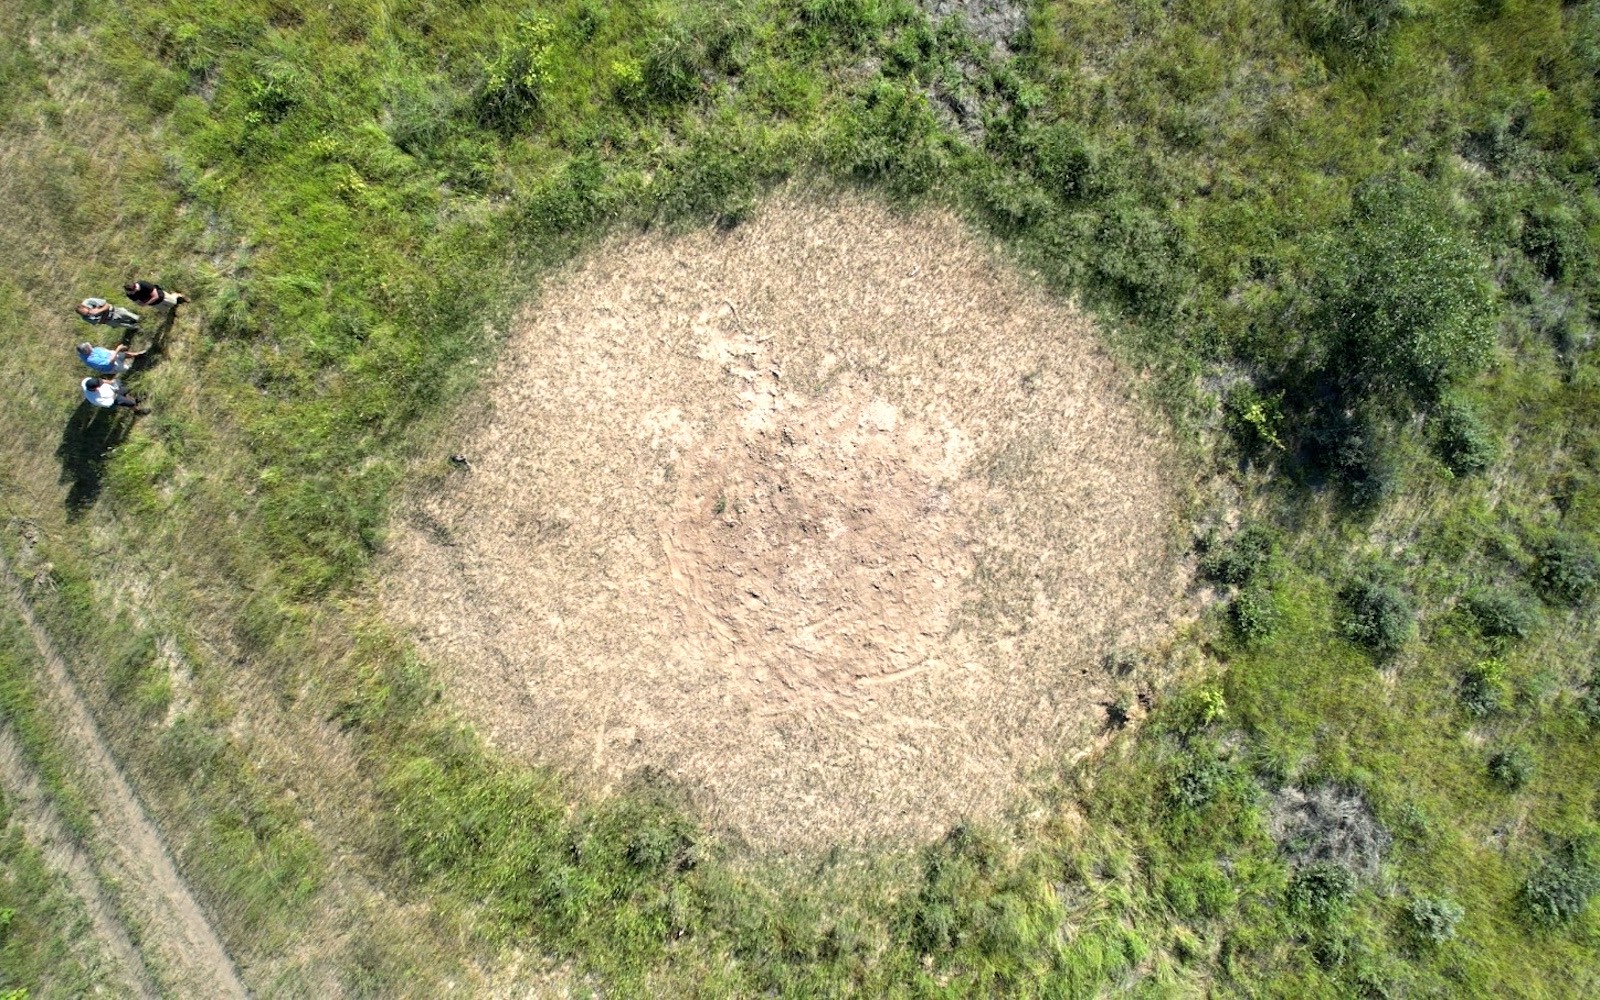 An aerial view of a Namibian fairy sphere with four people standing next to it.